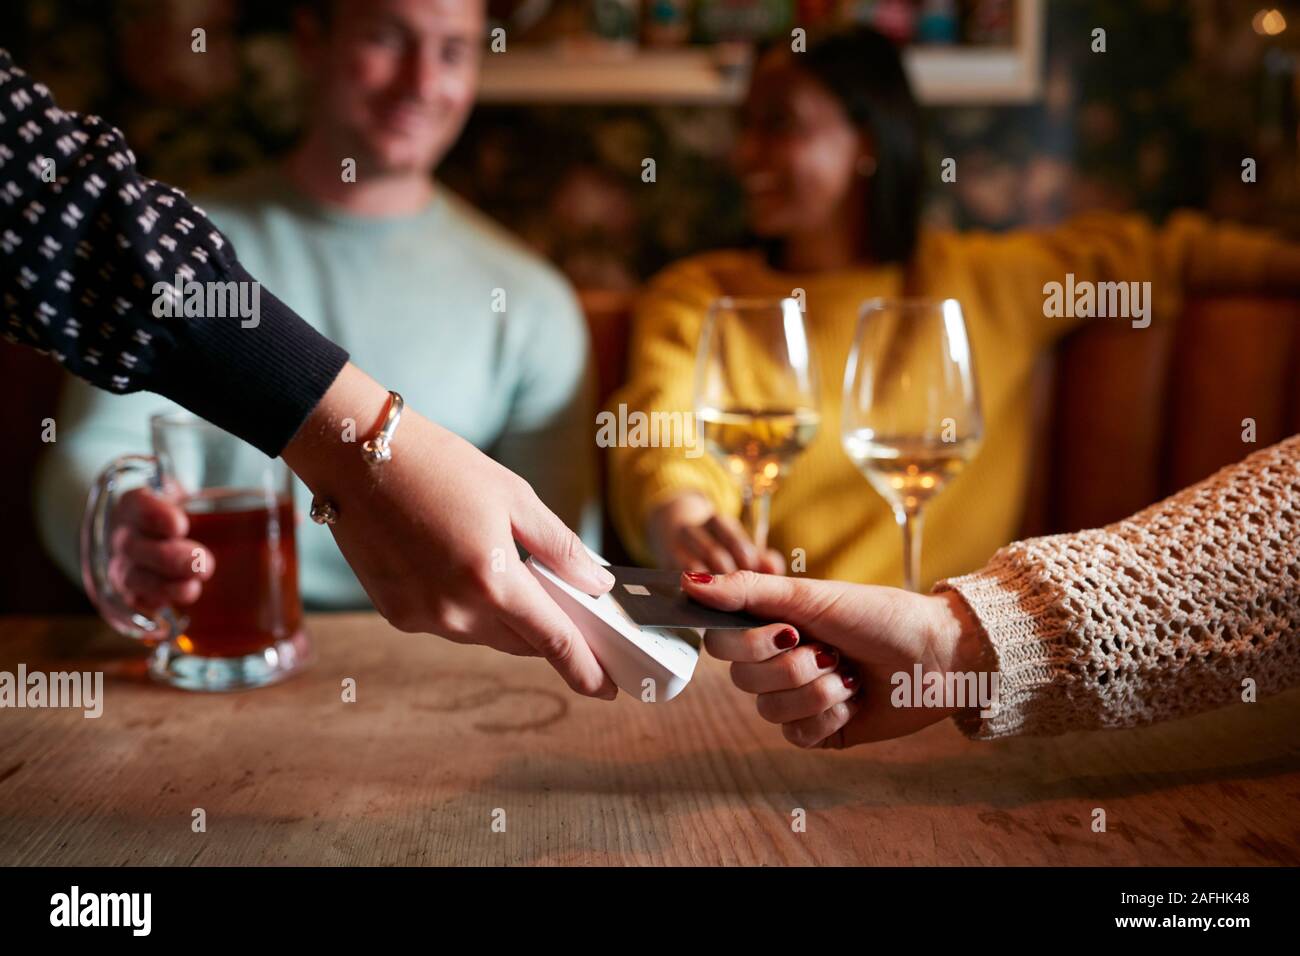 Close Up Of Customer Paying In Hotel Restaurant Using Contactless Card Reader Stock Photo